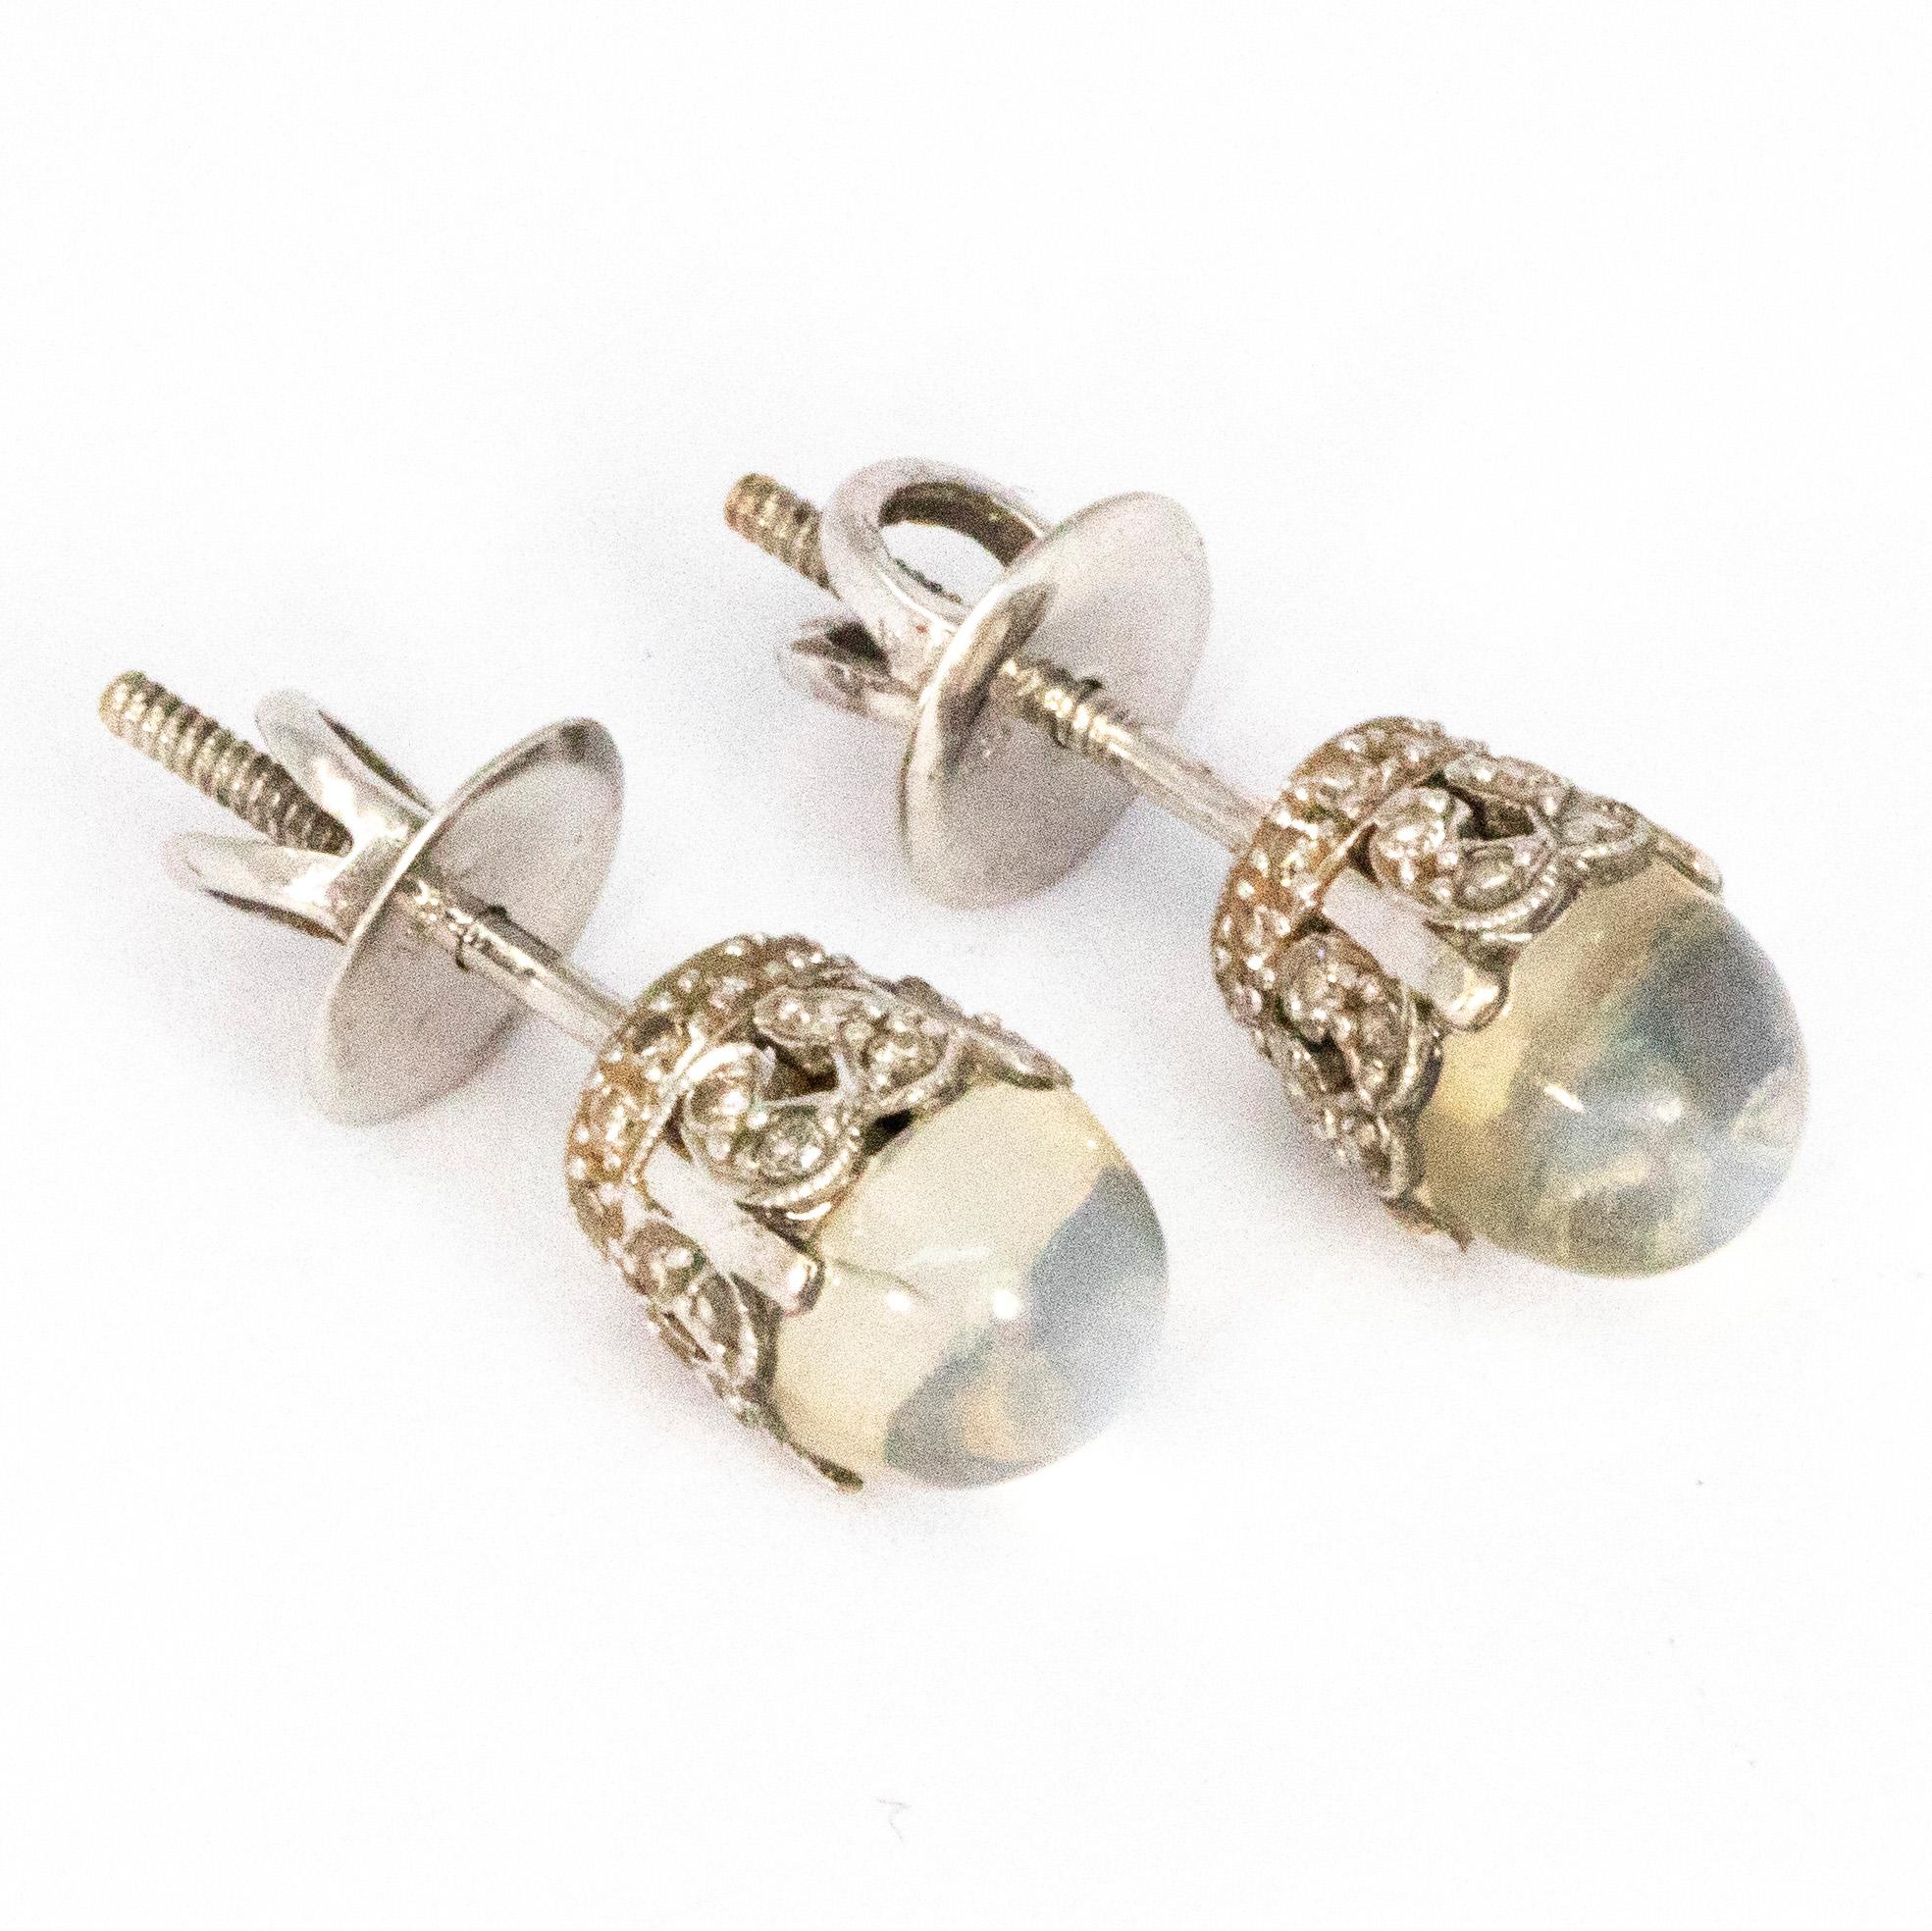 Set in the exquisitely engraved 18ct white gold earring back are two gorgeous sugarloaf moonstones. They have a lovely blue hue and are wonderfully glossy. These studs are screw back.

Stone Diameter: 6.5mm 
8mm Off Ear
